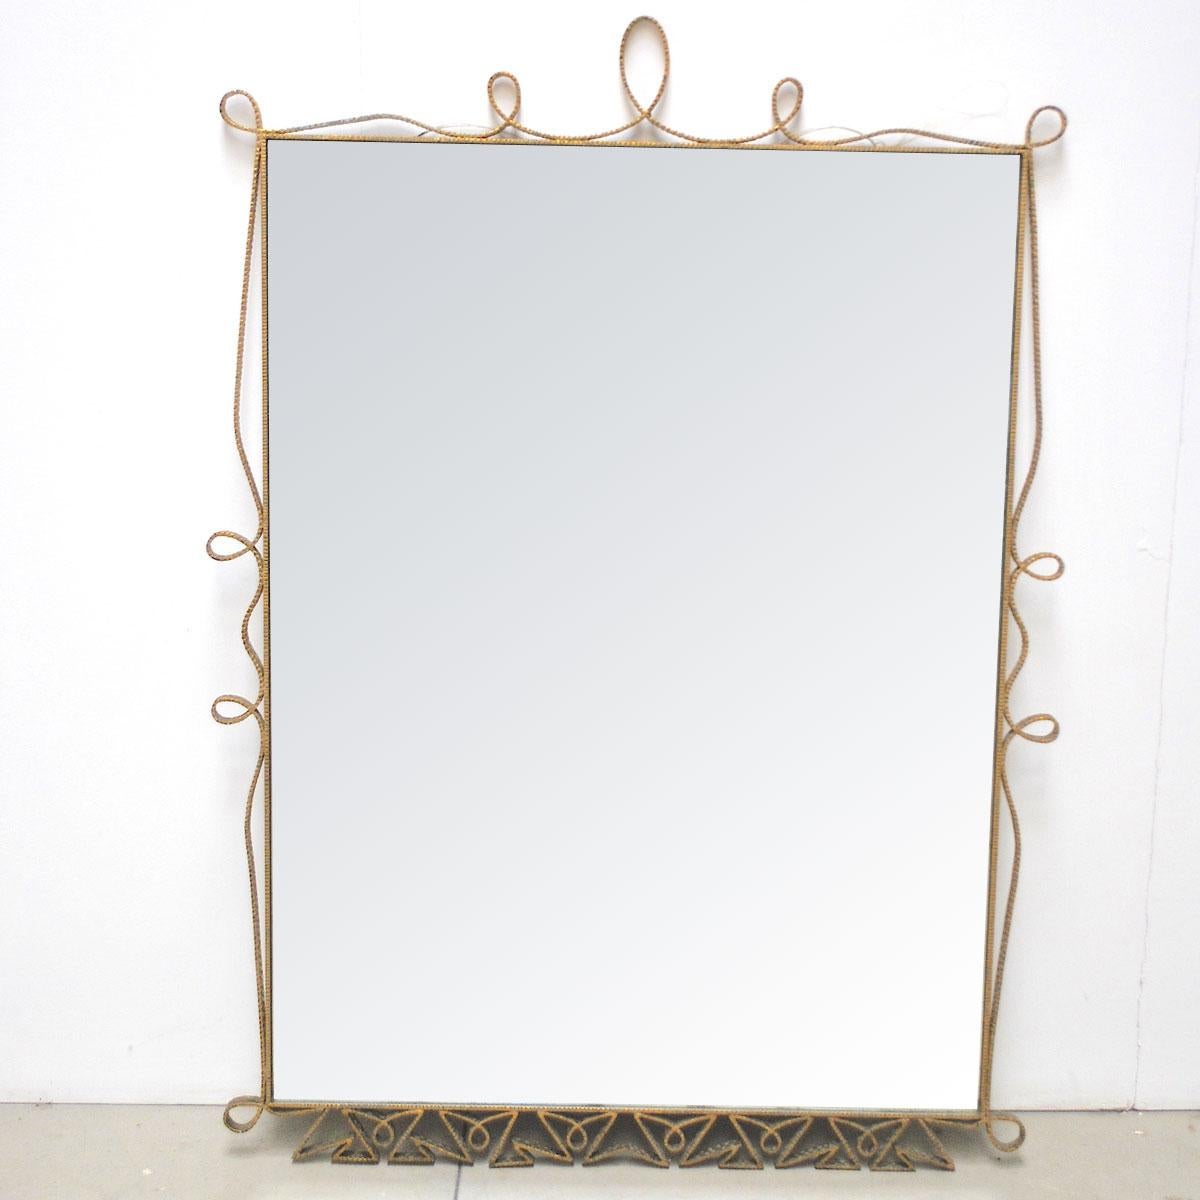 A large and decorative mirror by Pierluigi Colli 1950s in golden wrought metal.